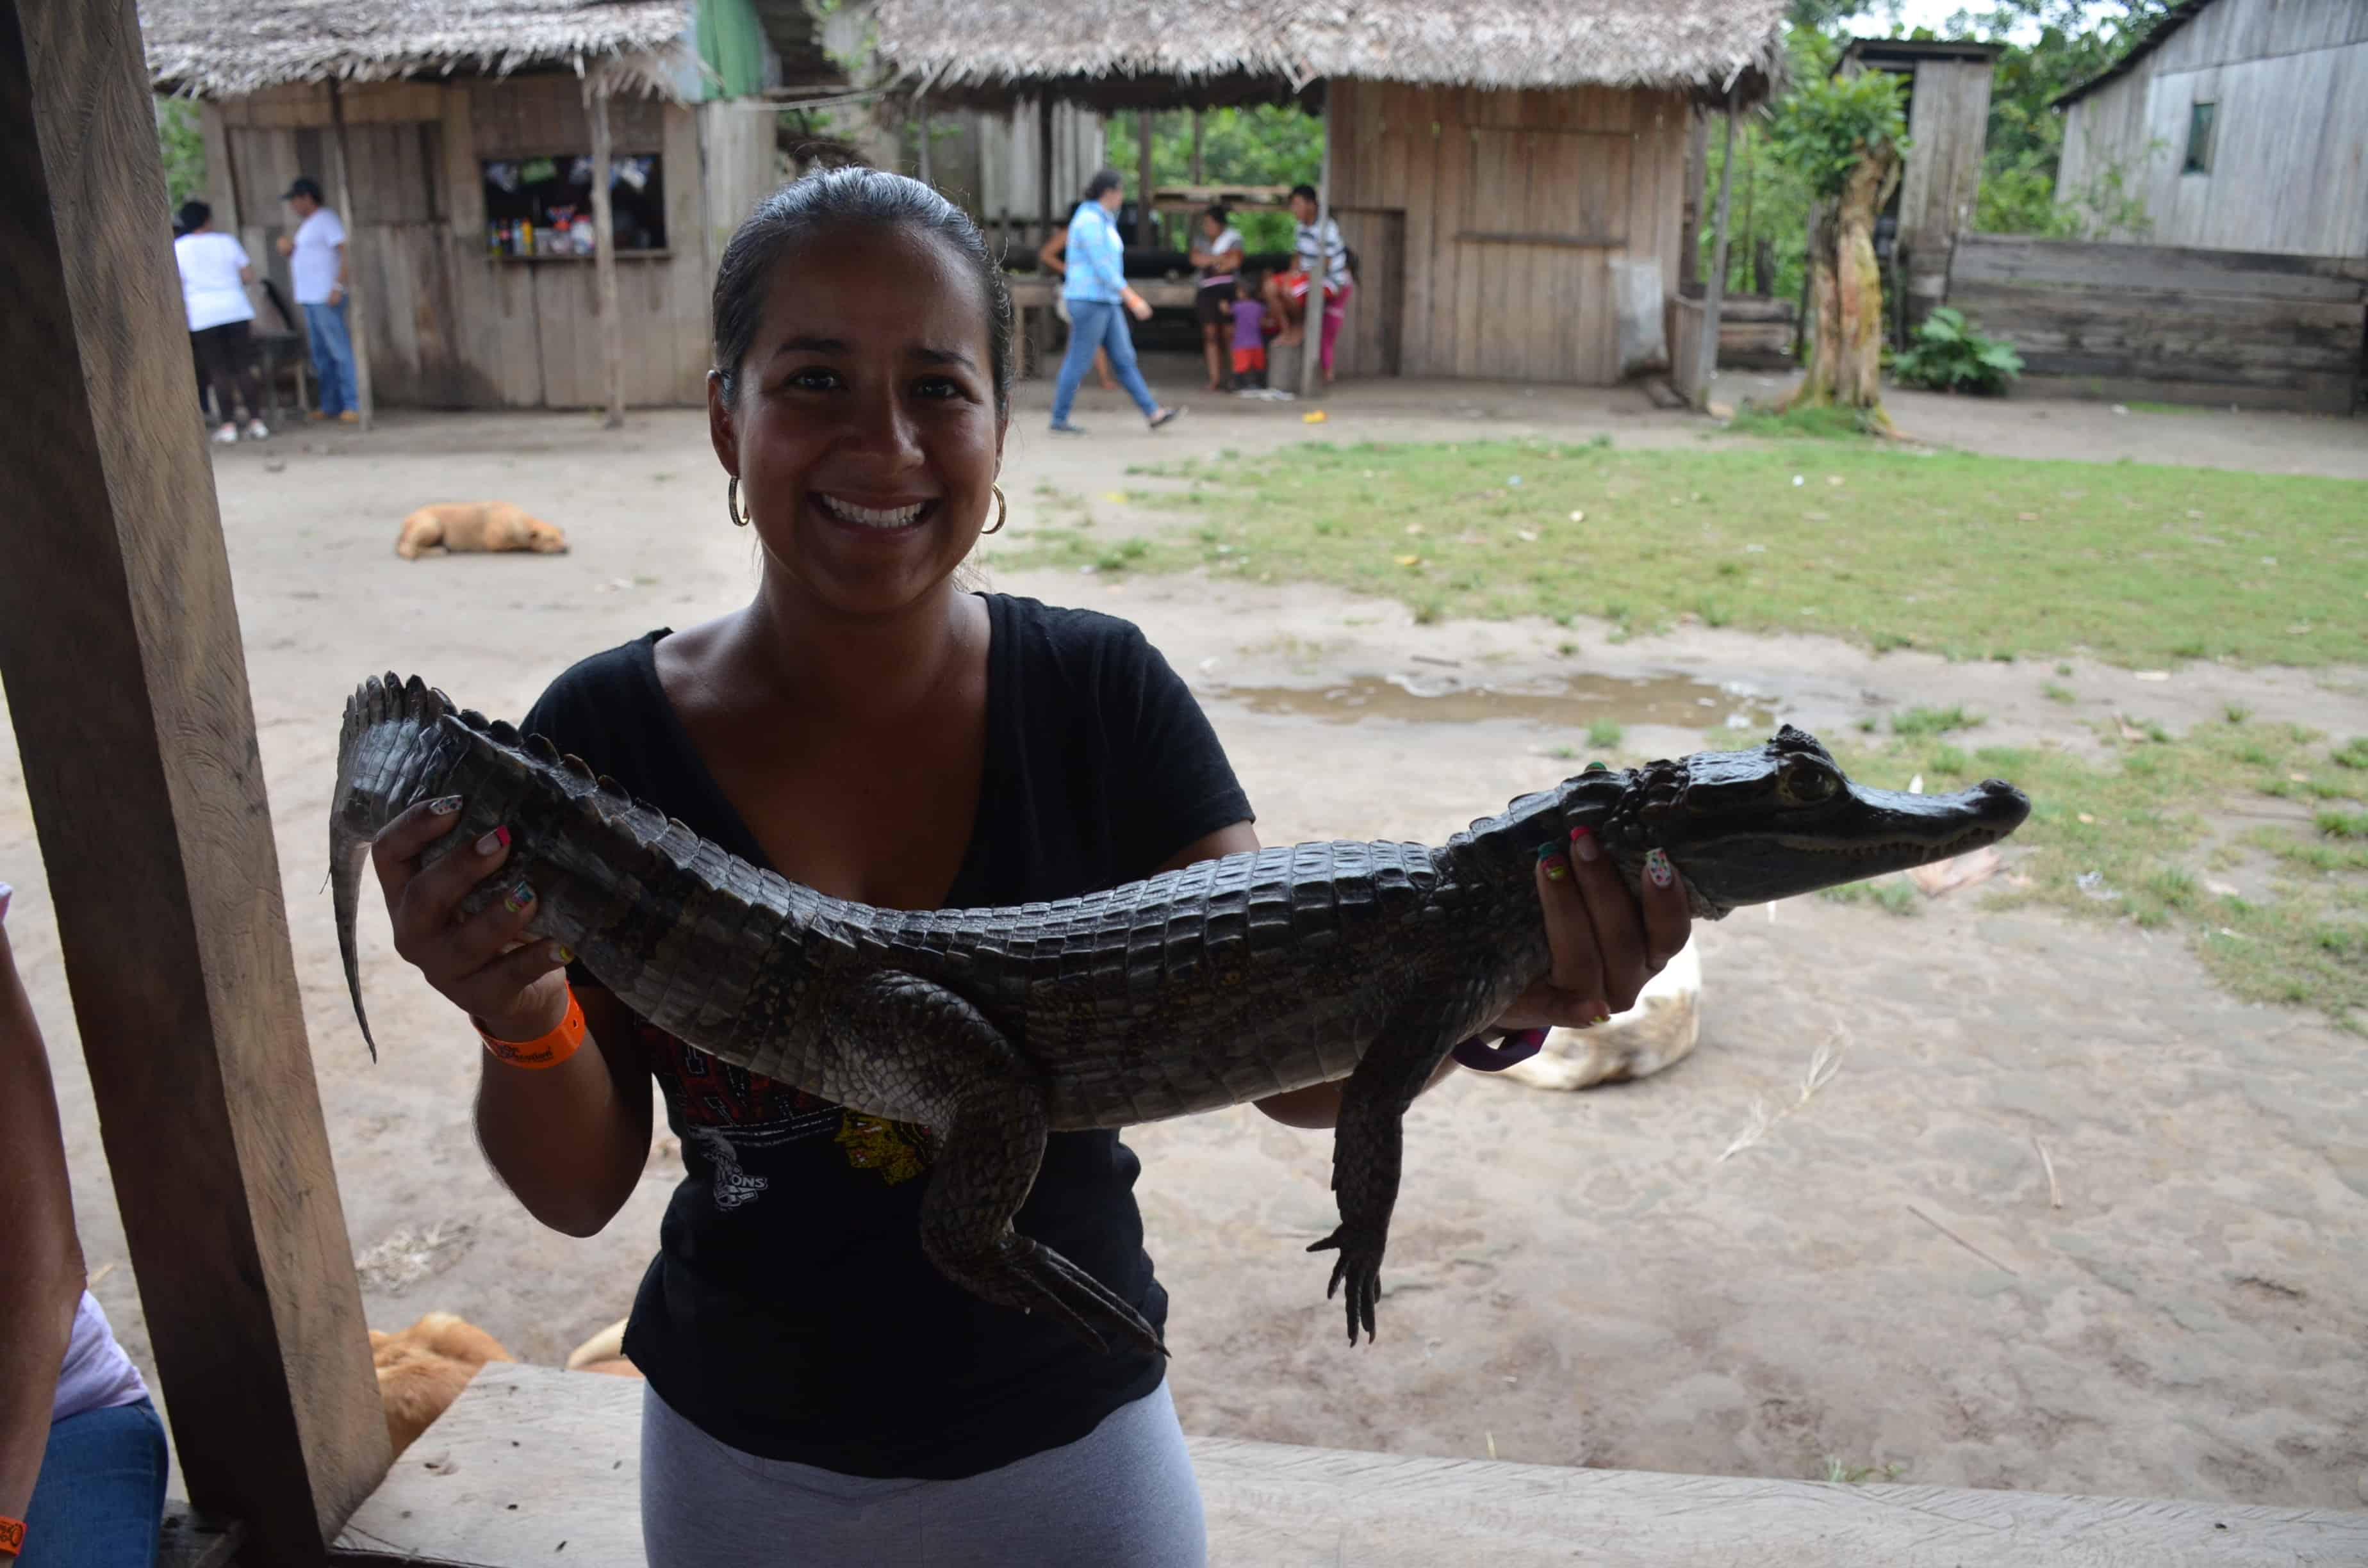 Marisol holding a caiman